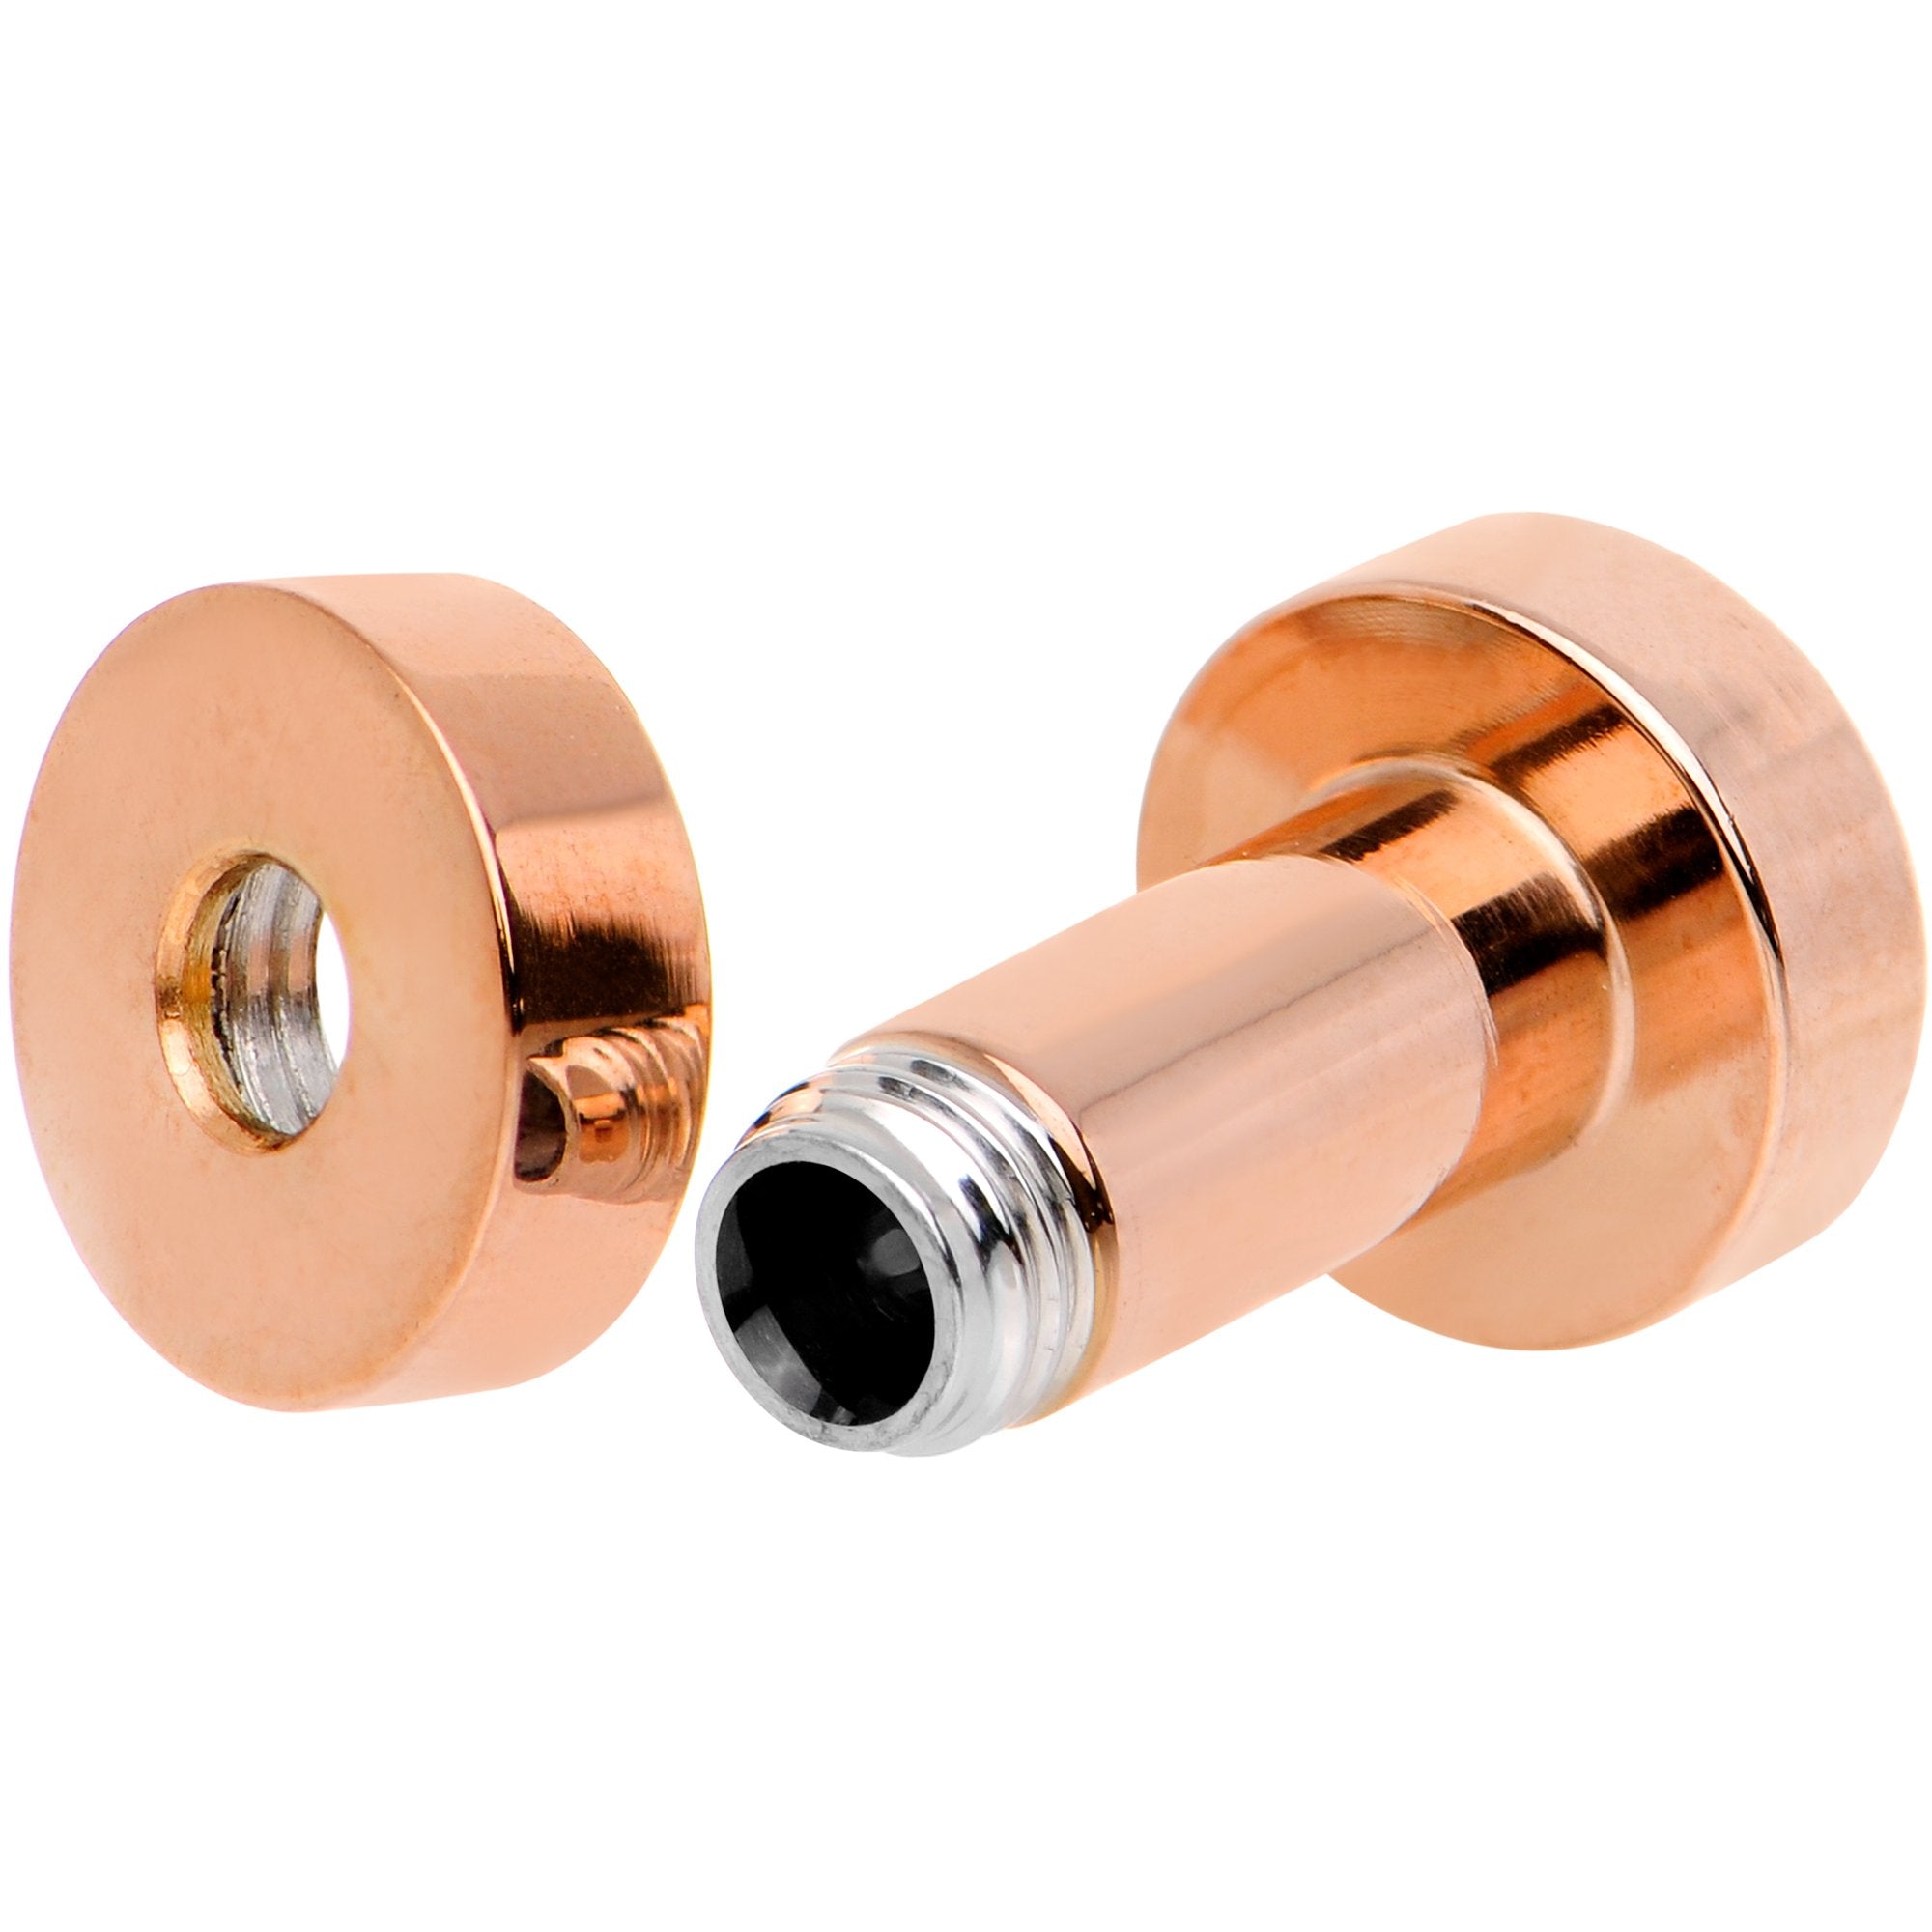 Clear CZ Gem Rose Gold PVD Bling Screw Fit Tunnel Plug Set 3mm to 16mm